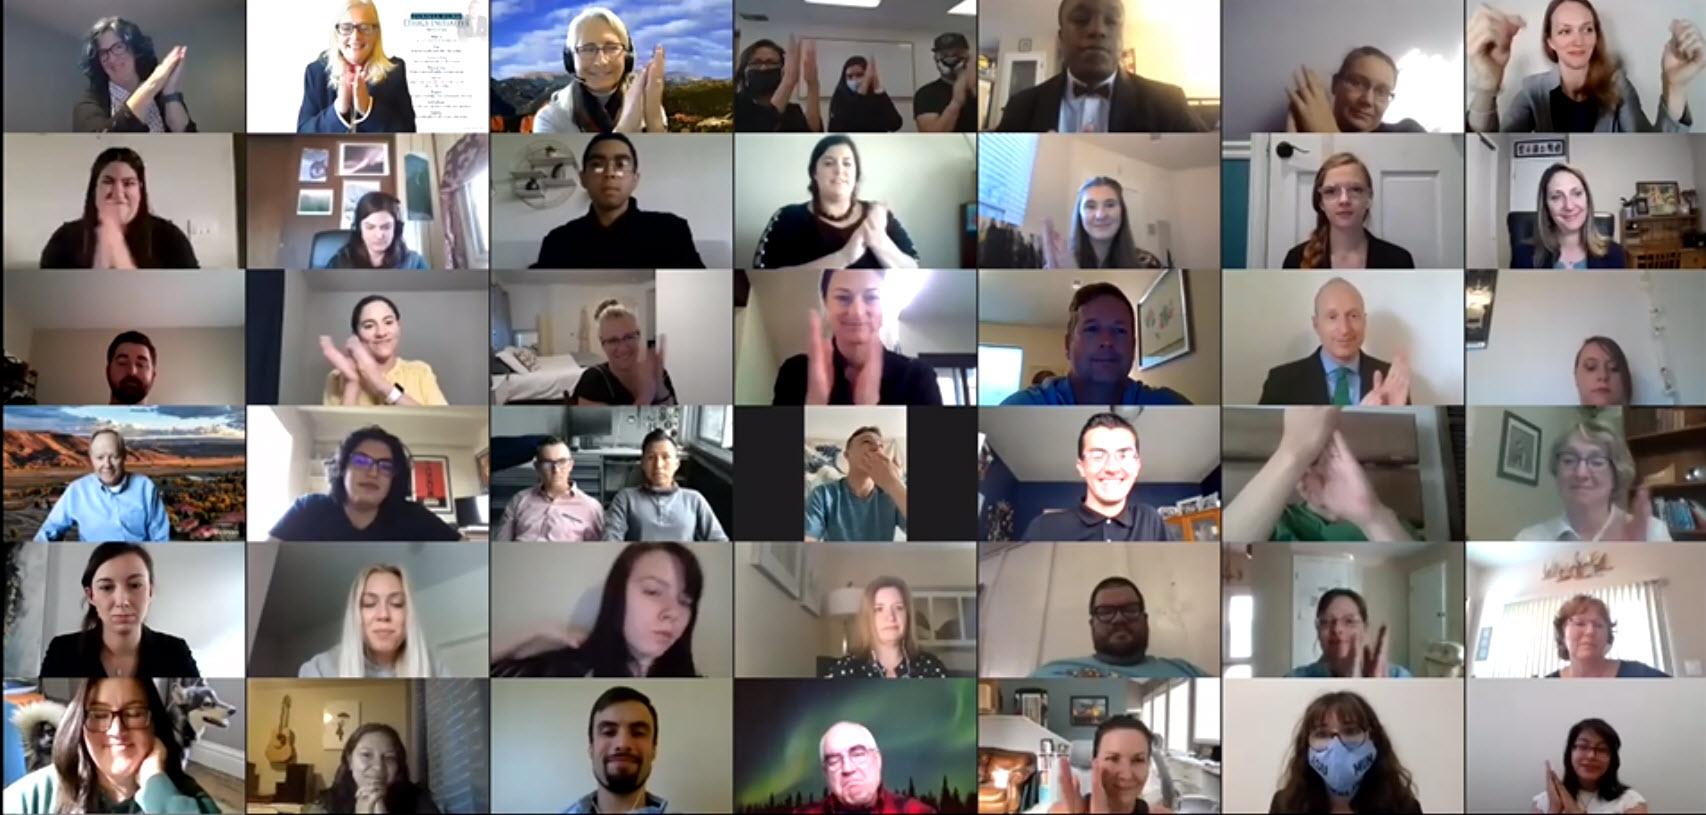 A screen capture of 42 people clapping in a virtual event